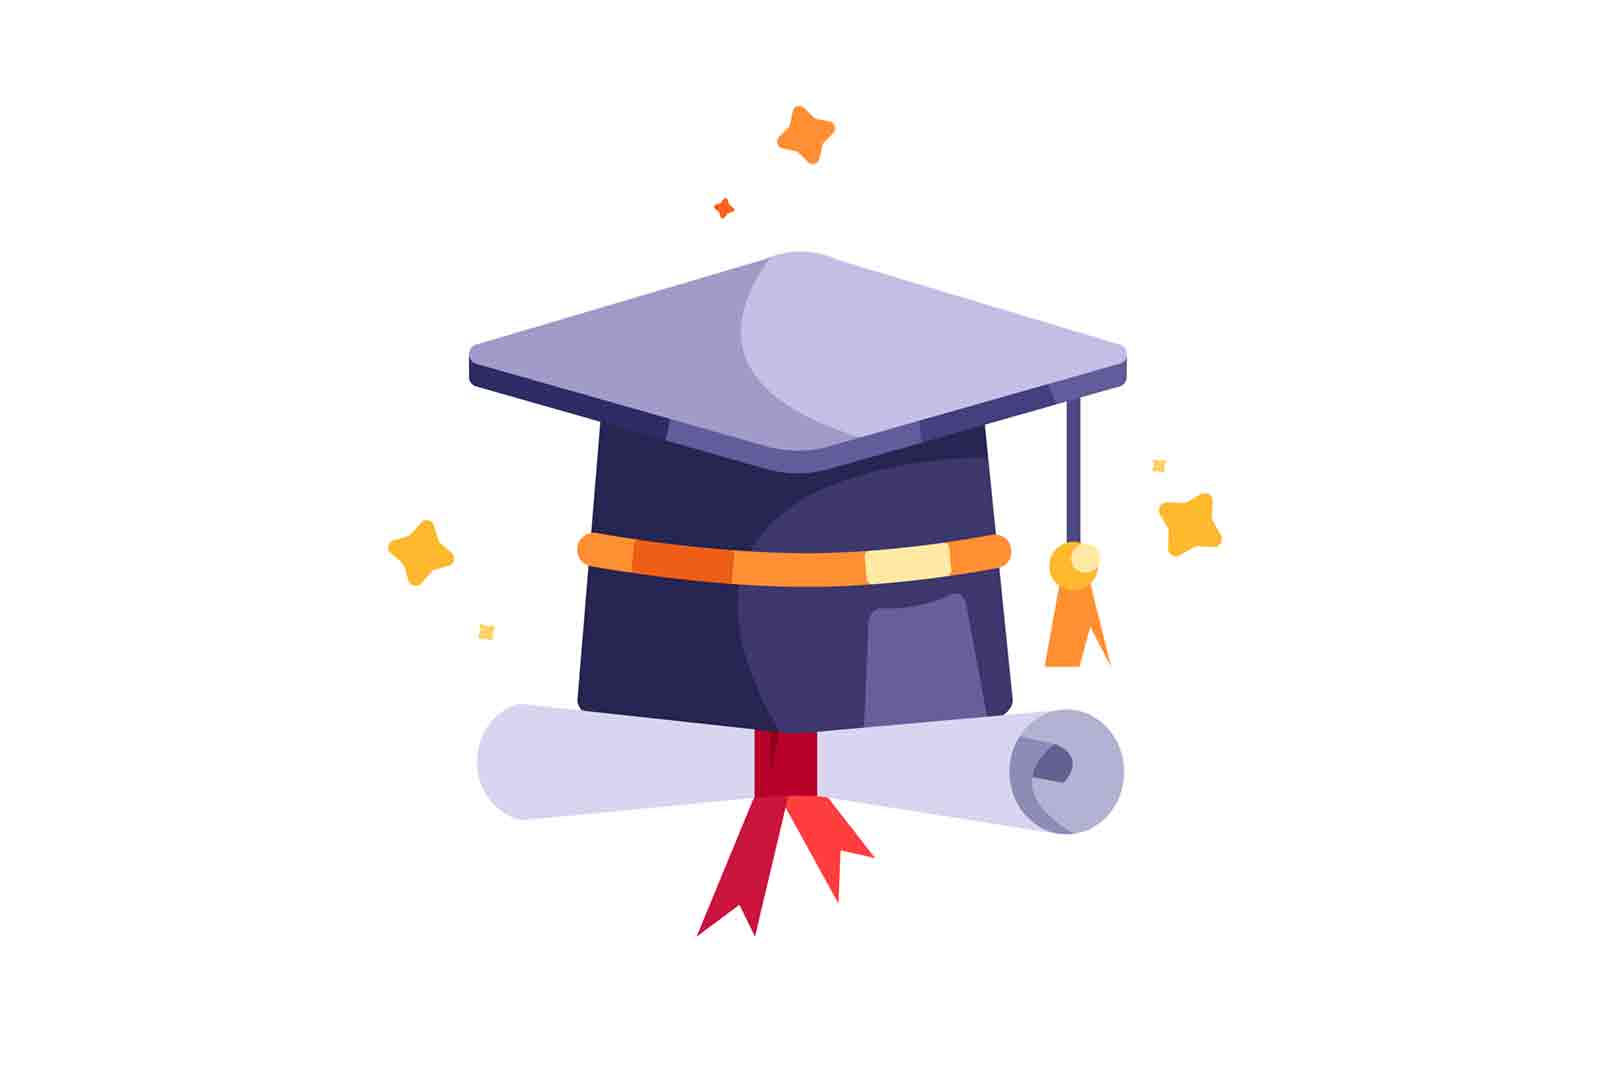 Graduation cap with scroll school graduation diploma isolated on white background flat vector illustration.